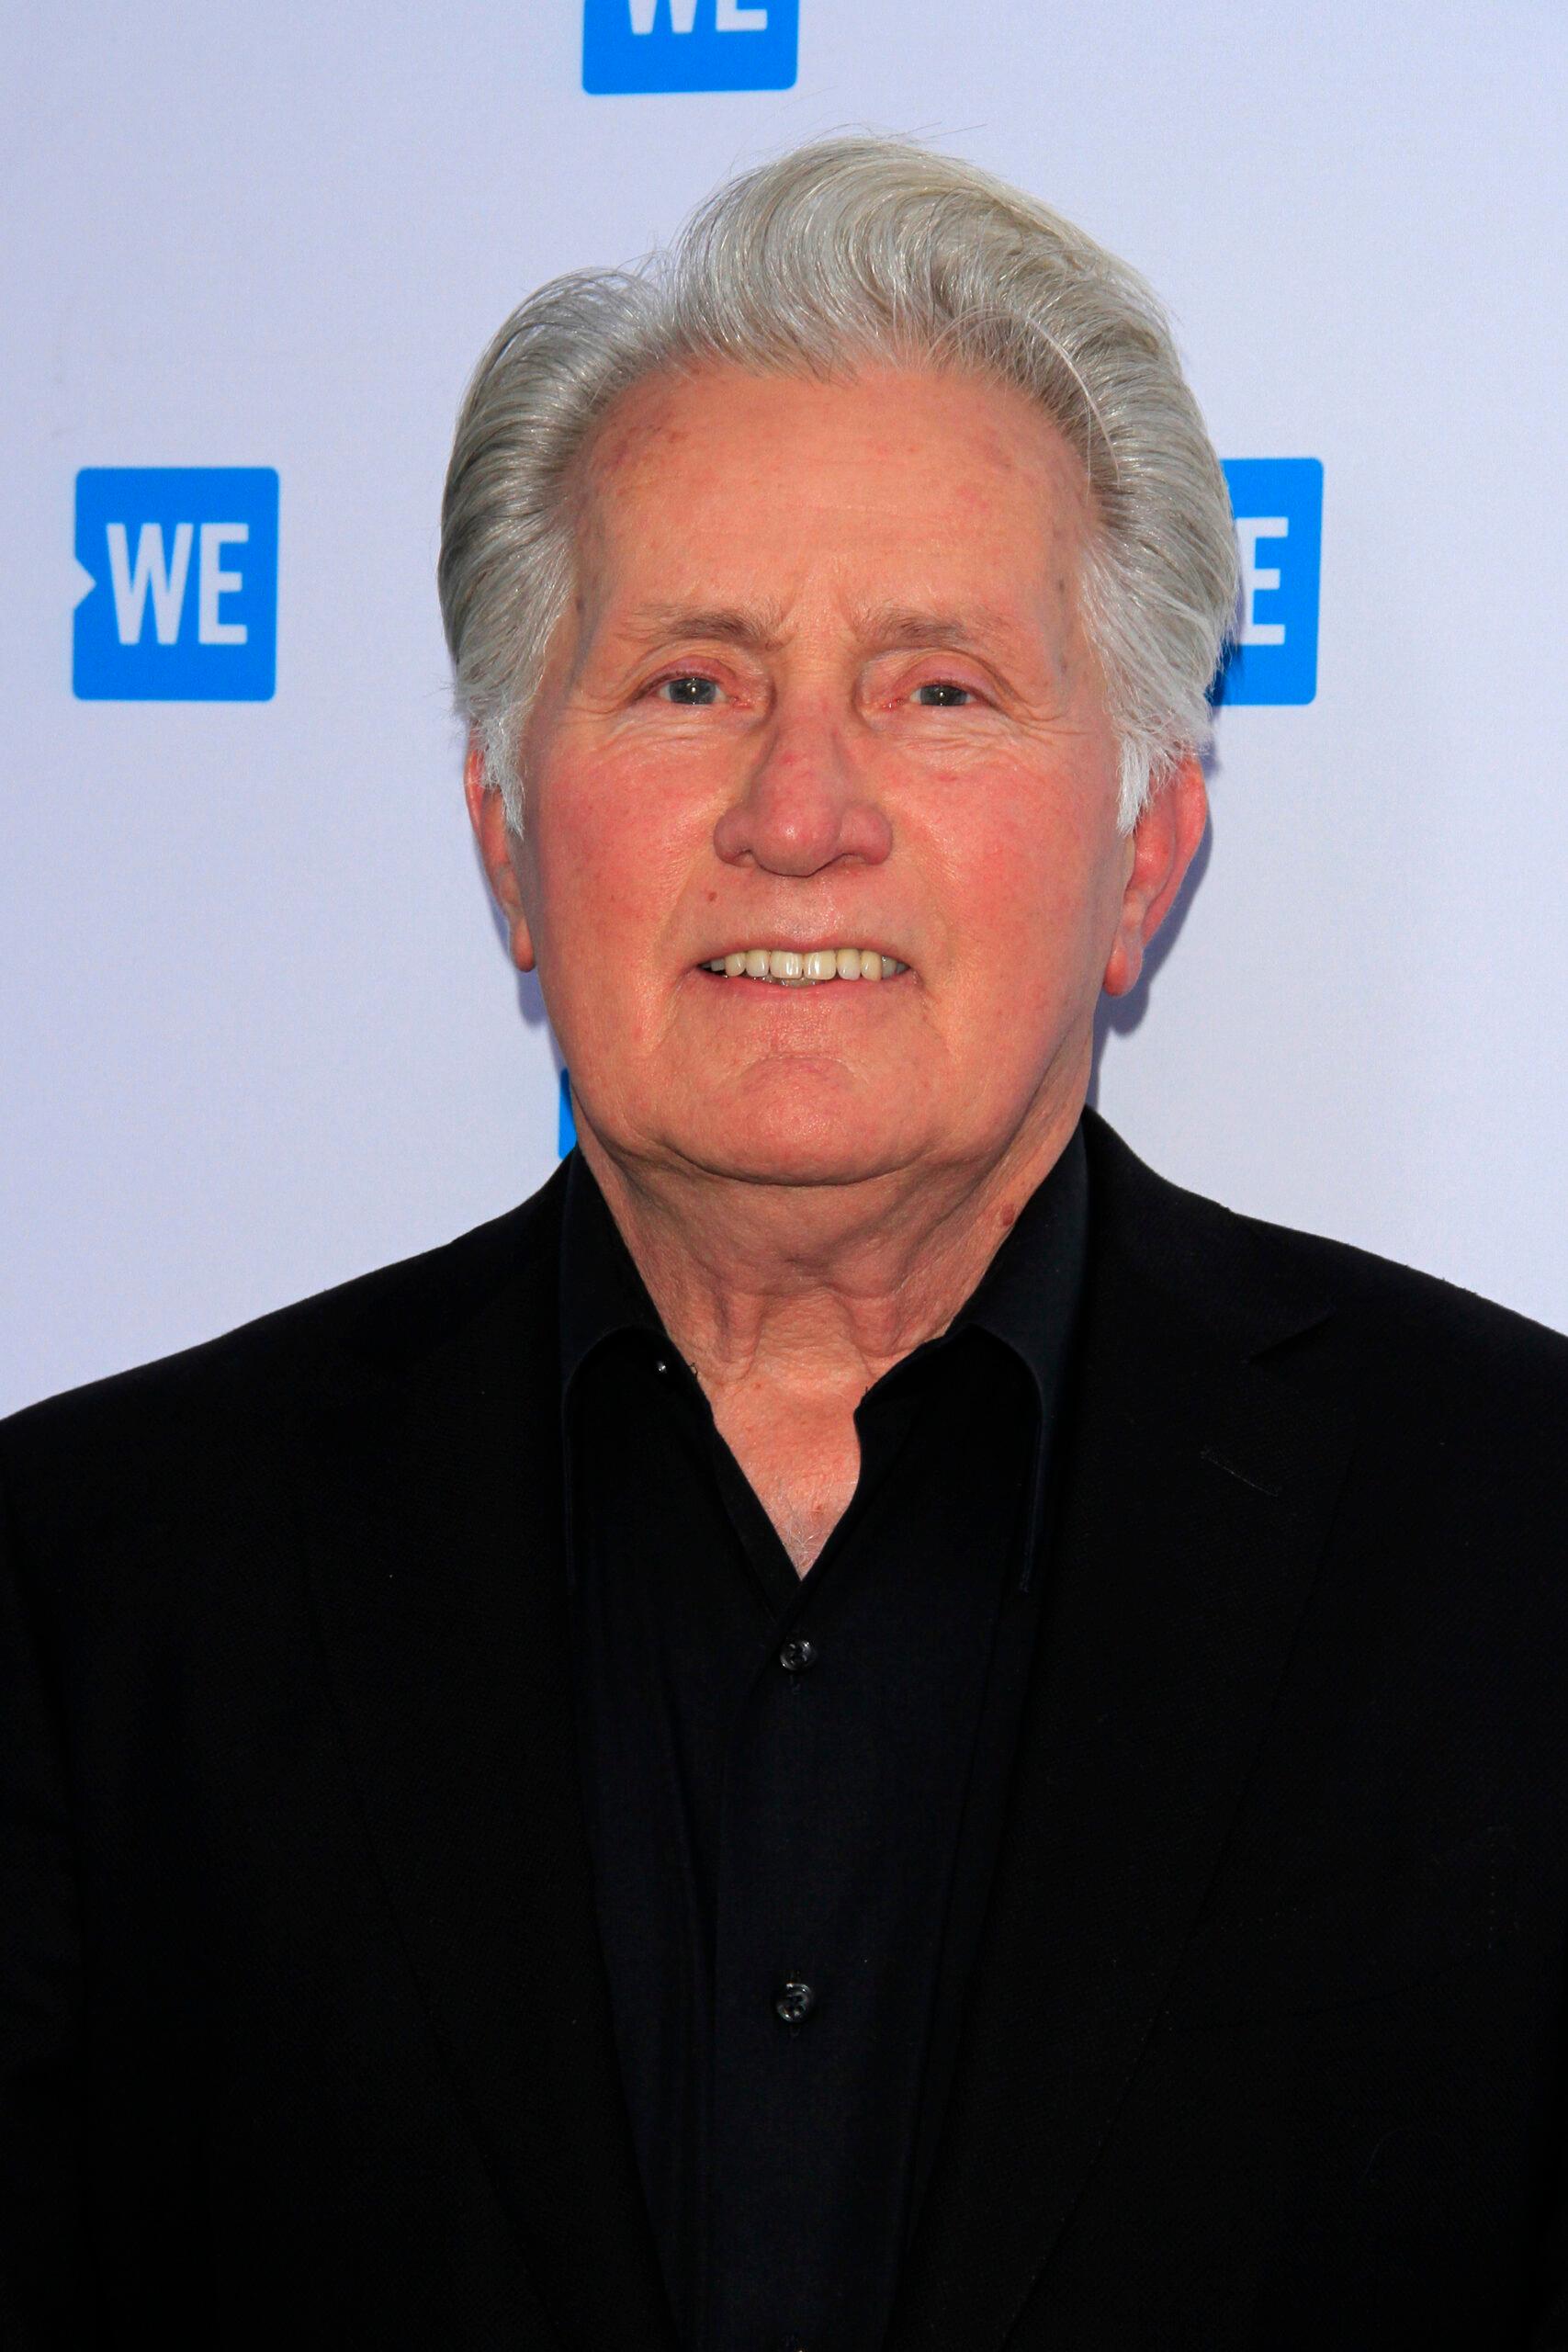 LOS ANGELES - APR 24: Martin Sheen at the We Day California 2017 Cocktail Reception at NeueHouse Hollywood on April 26, 2017 in Los Angeles, California 